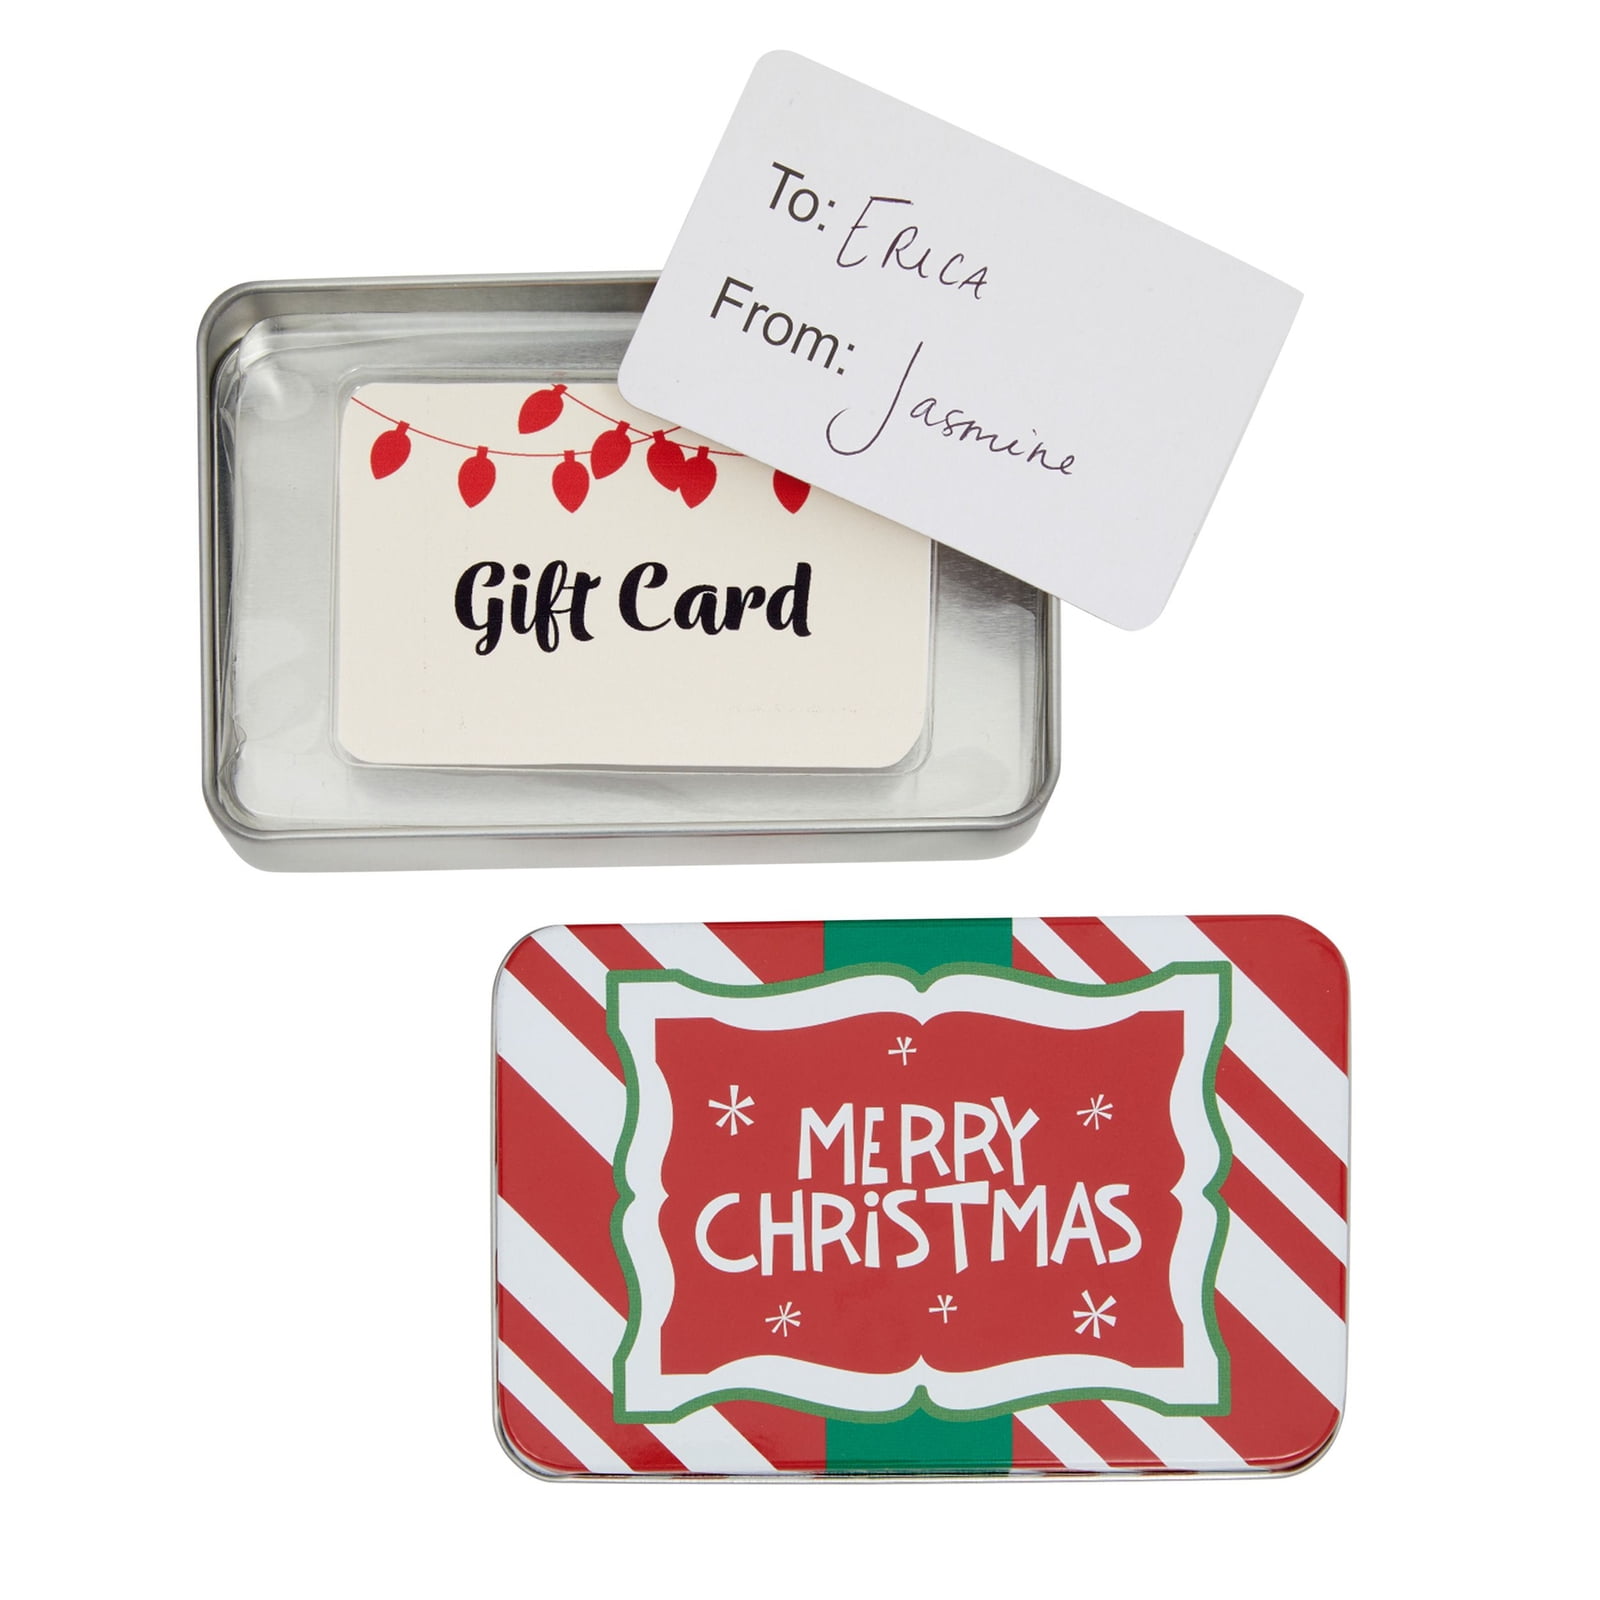 4.5 x 3.3 In, 6 Pack Metal Gift Card Tin Boxes and Lids for Christmas Presents